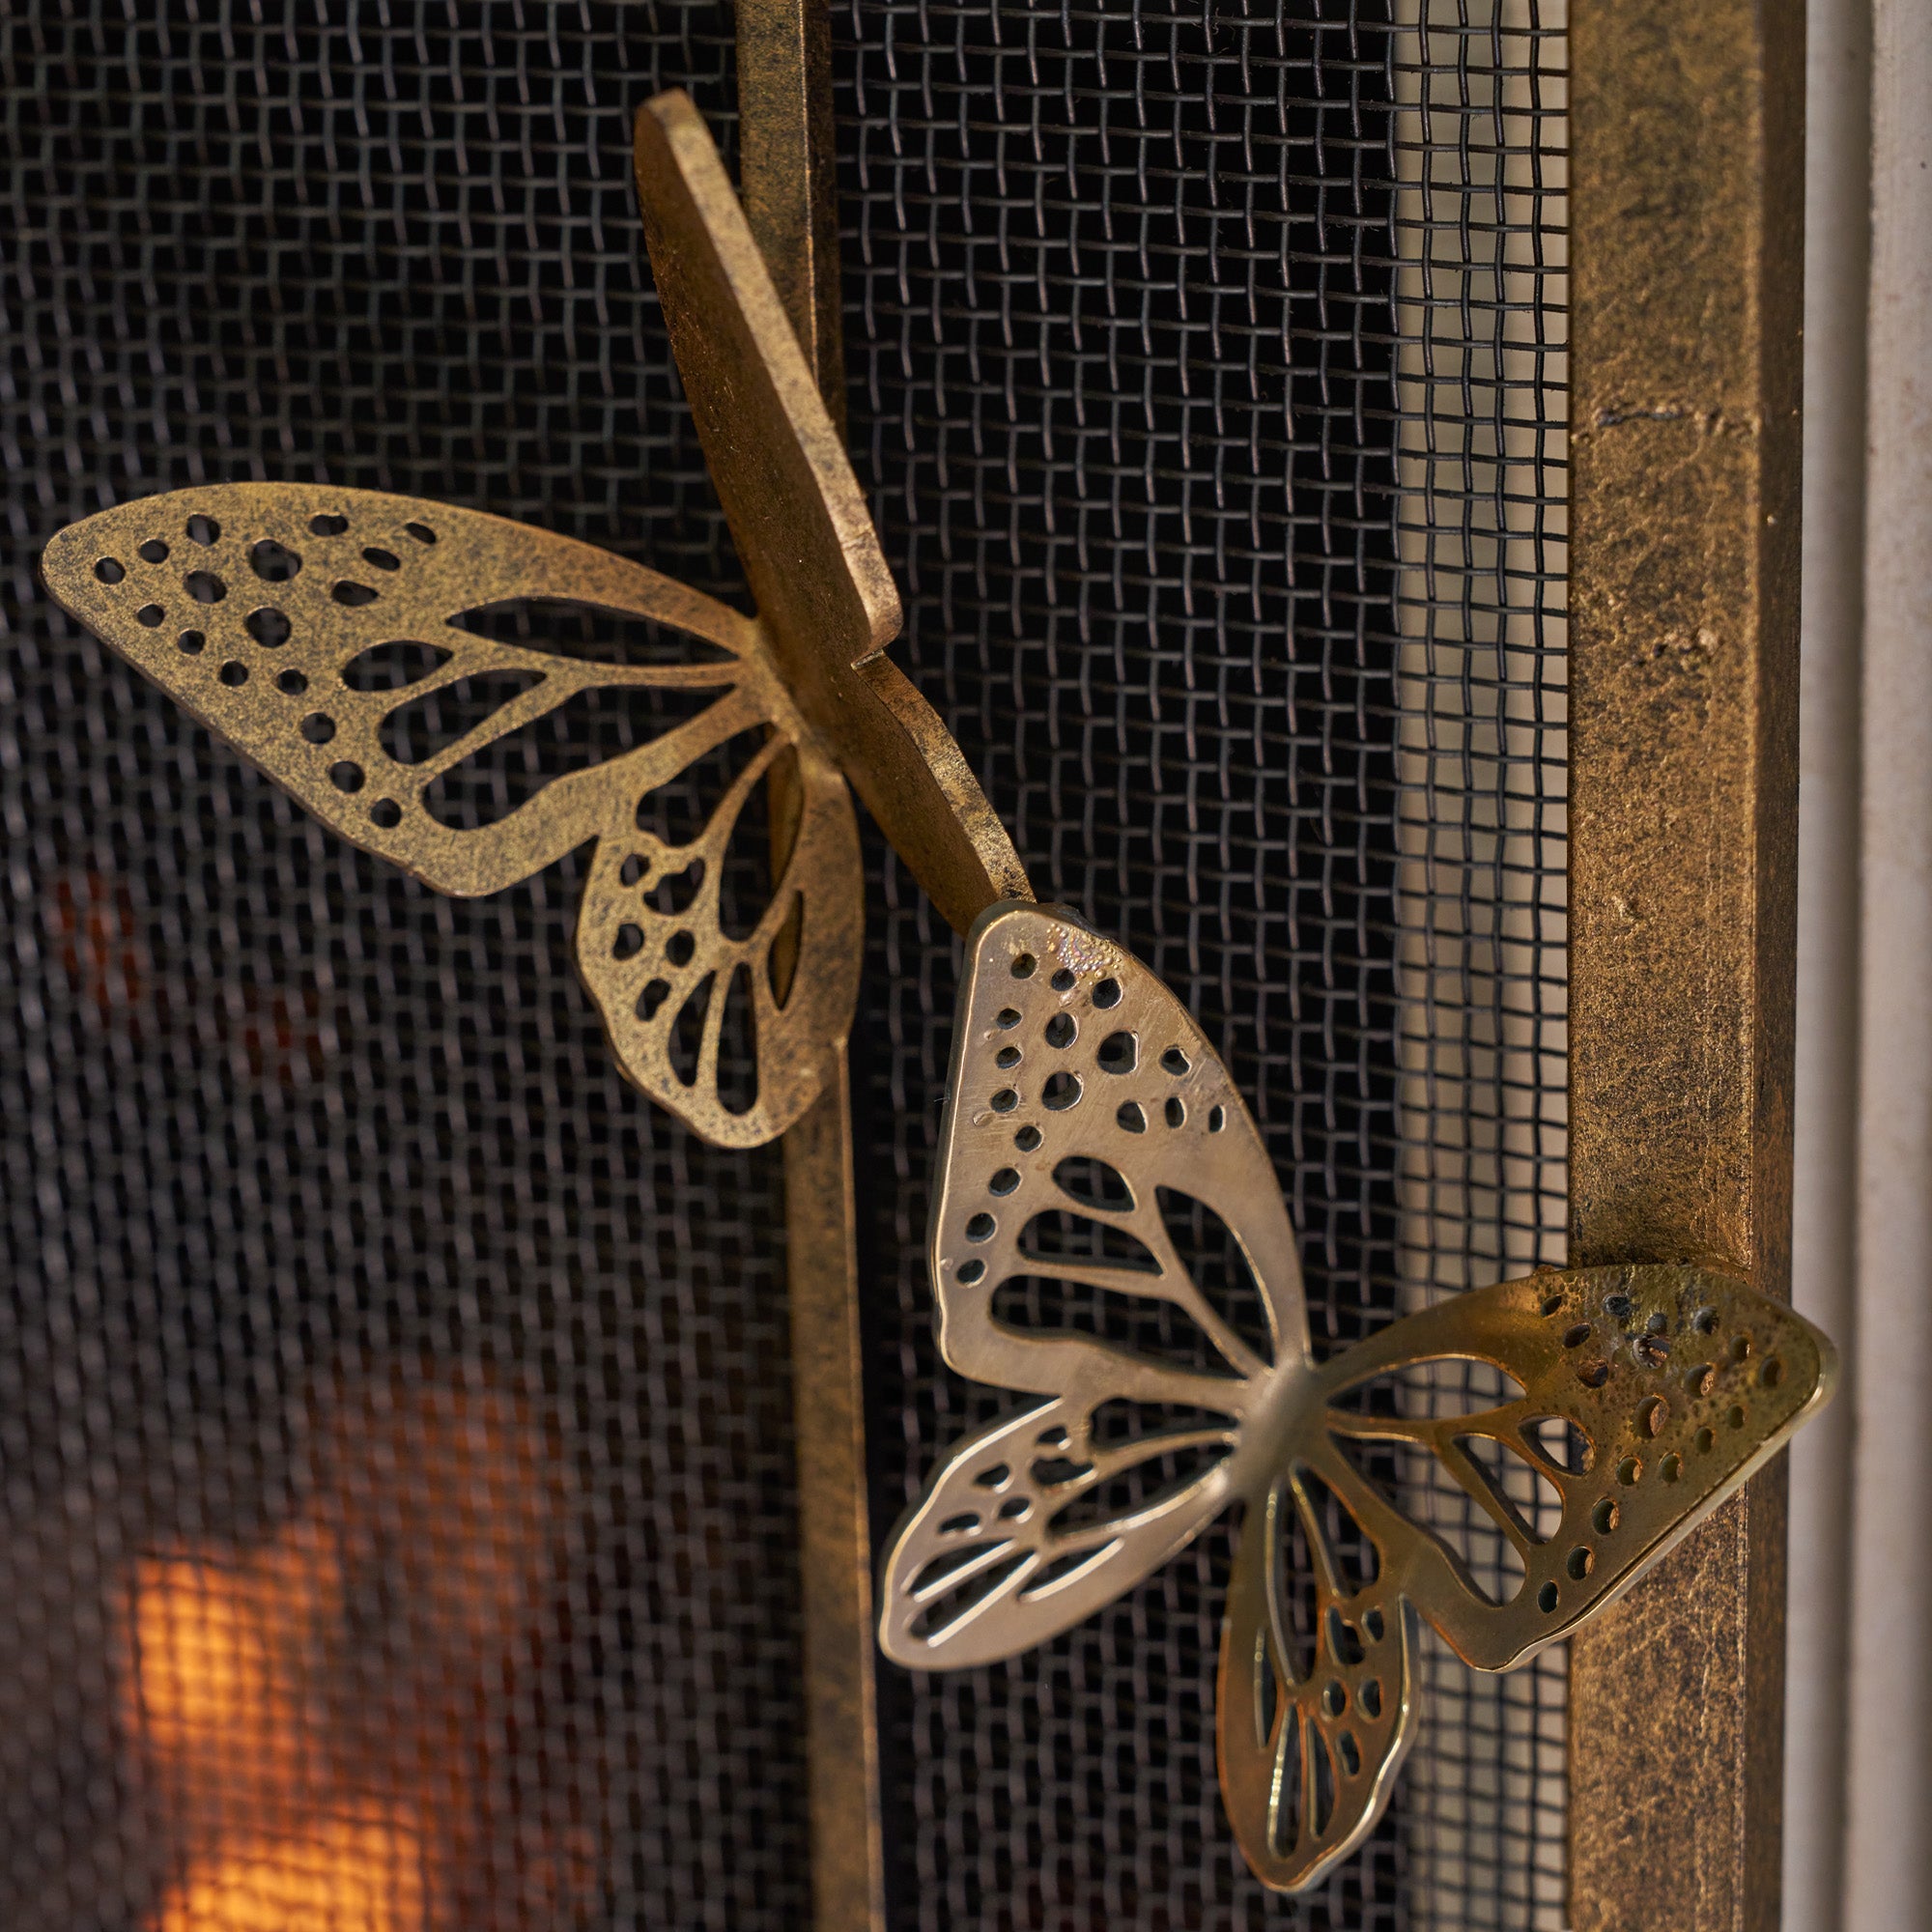 Monarch Fireplace Screen in Aged Gold